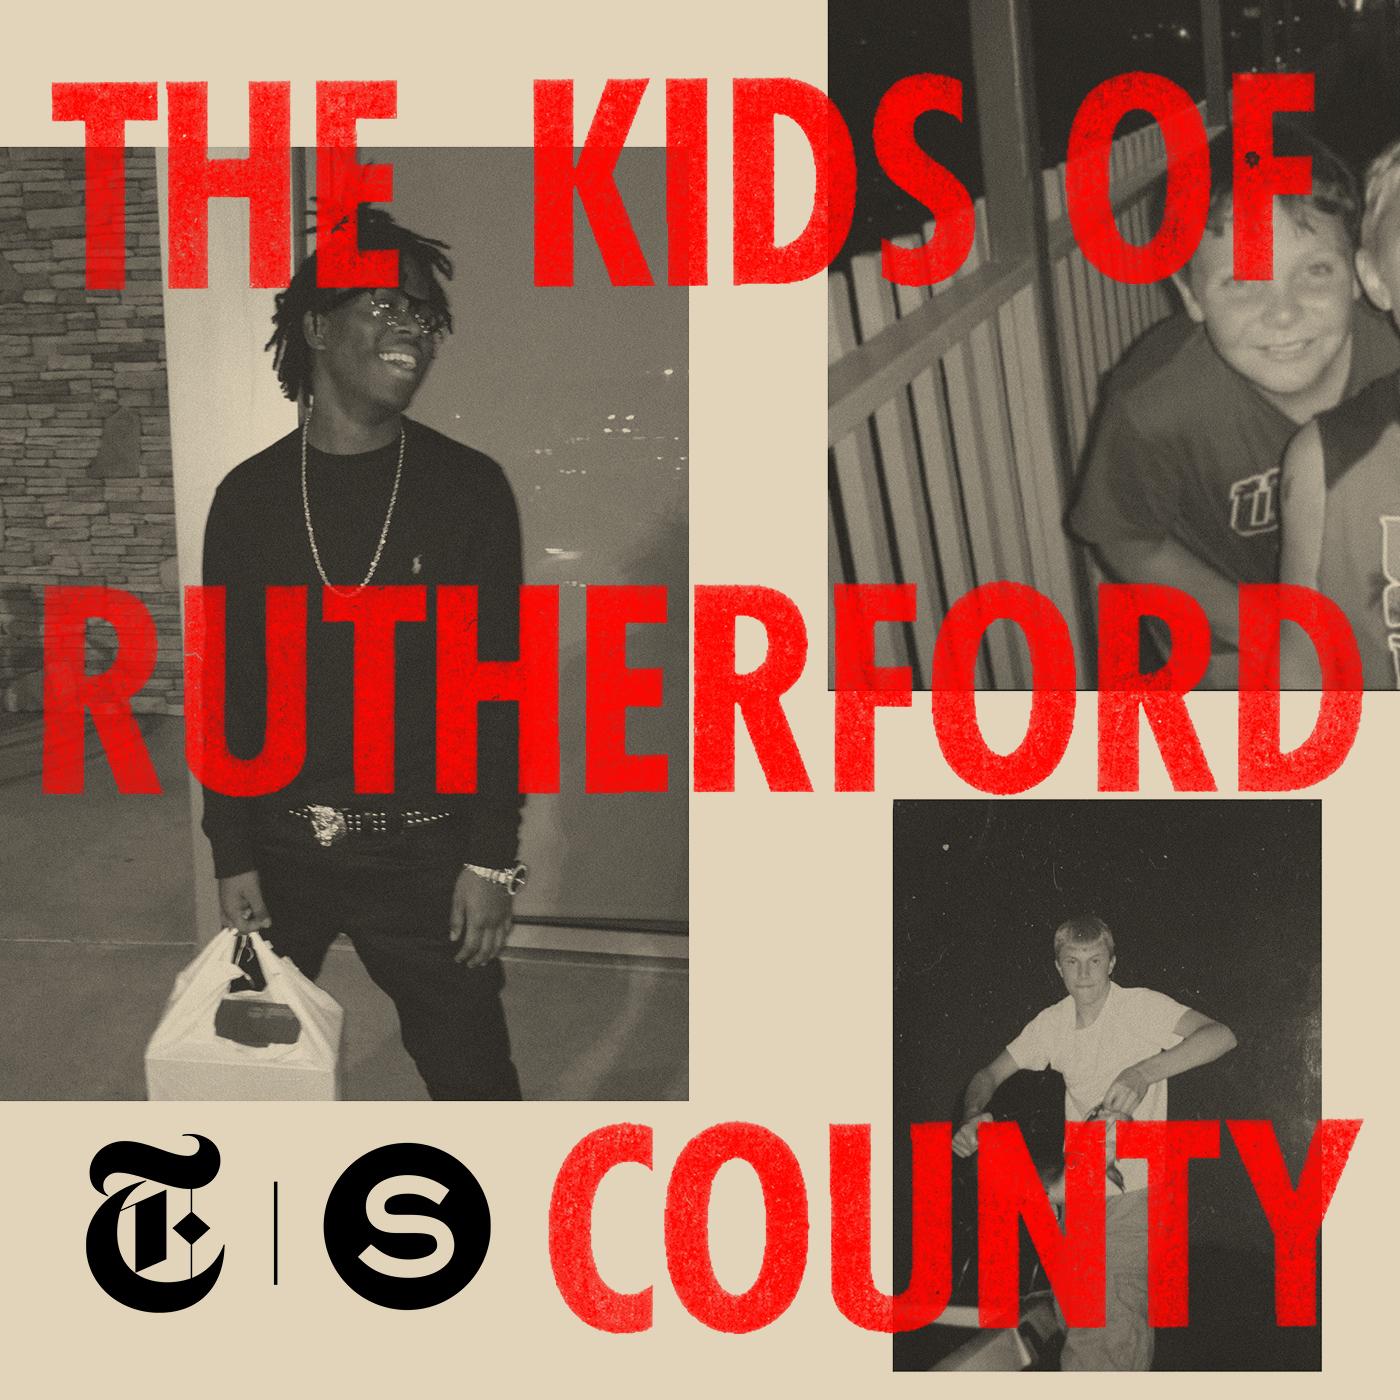 Thumbnail for "Bonus: Behind the music of The Kids of Rutherford County".